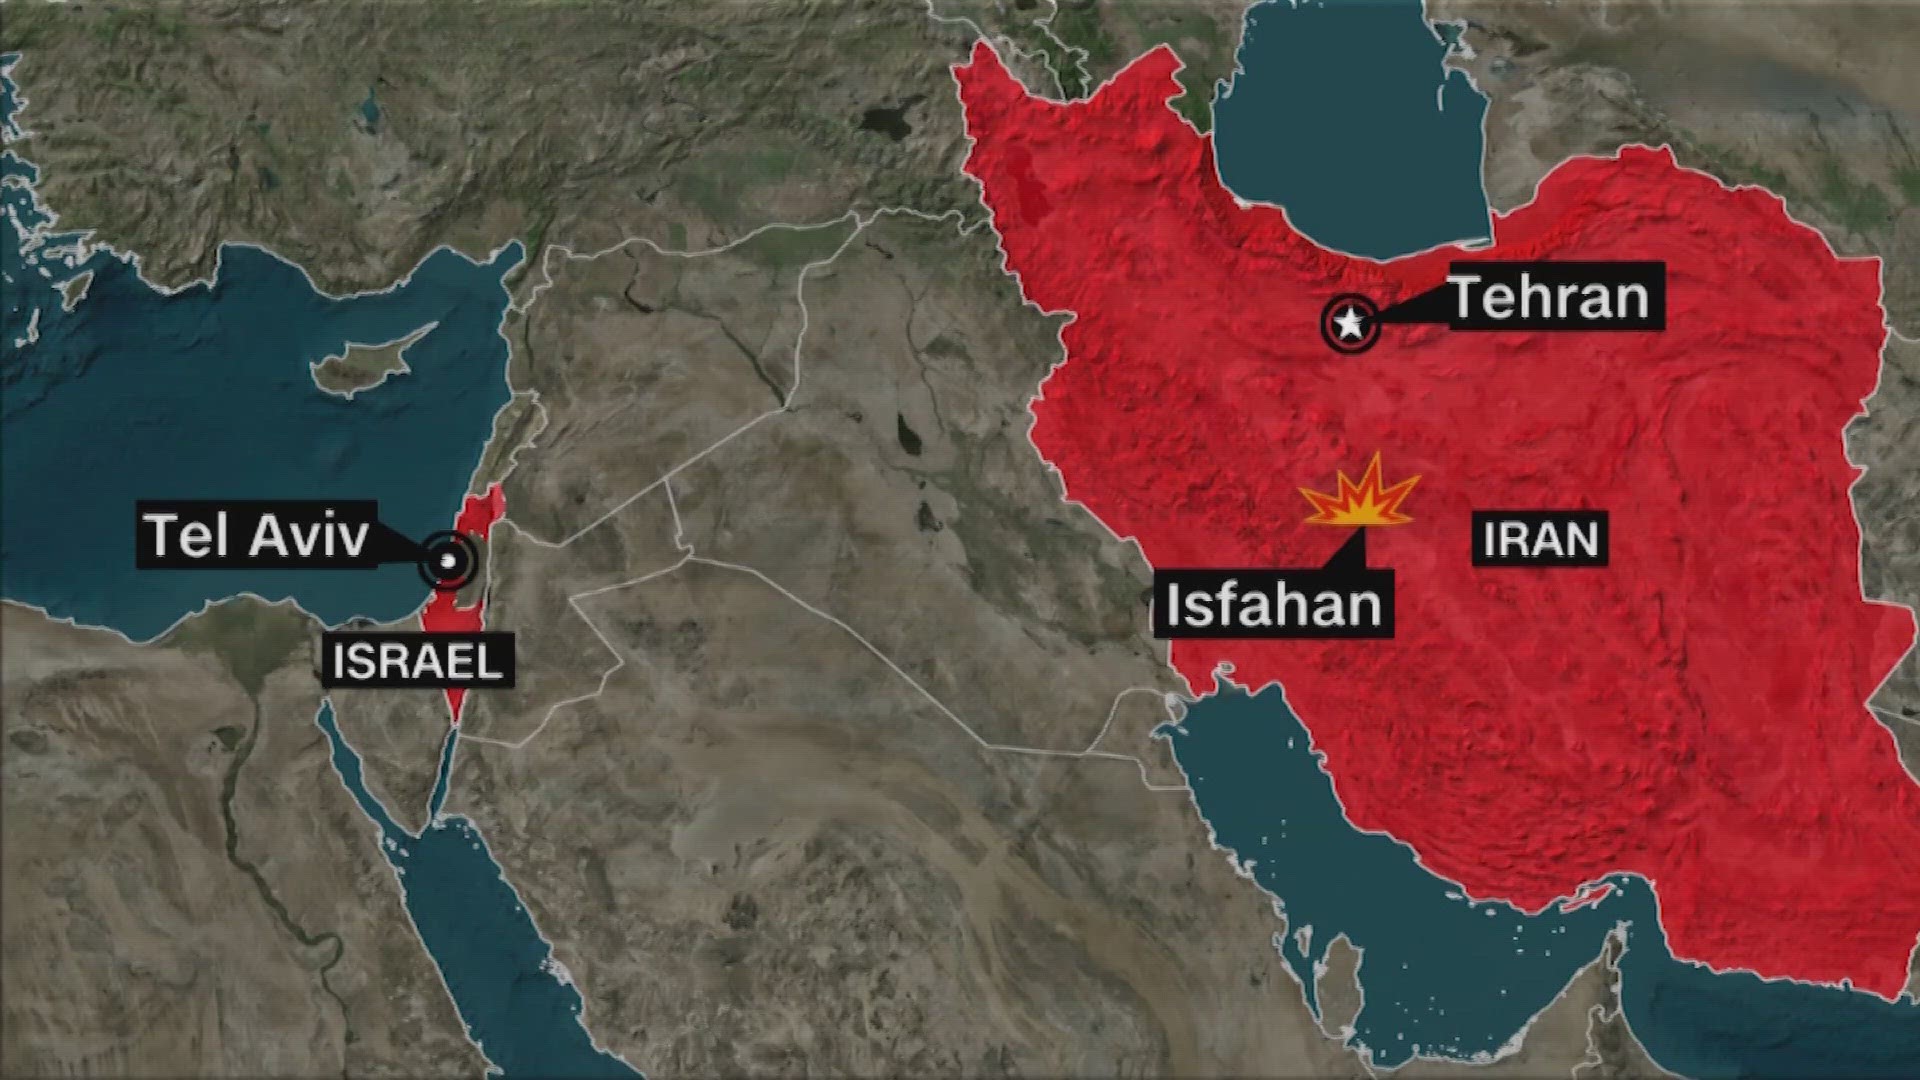 US officials now confirm an Israeli strike caused explosions in Iran early this morning. Iran has activated its air defense systems.